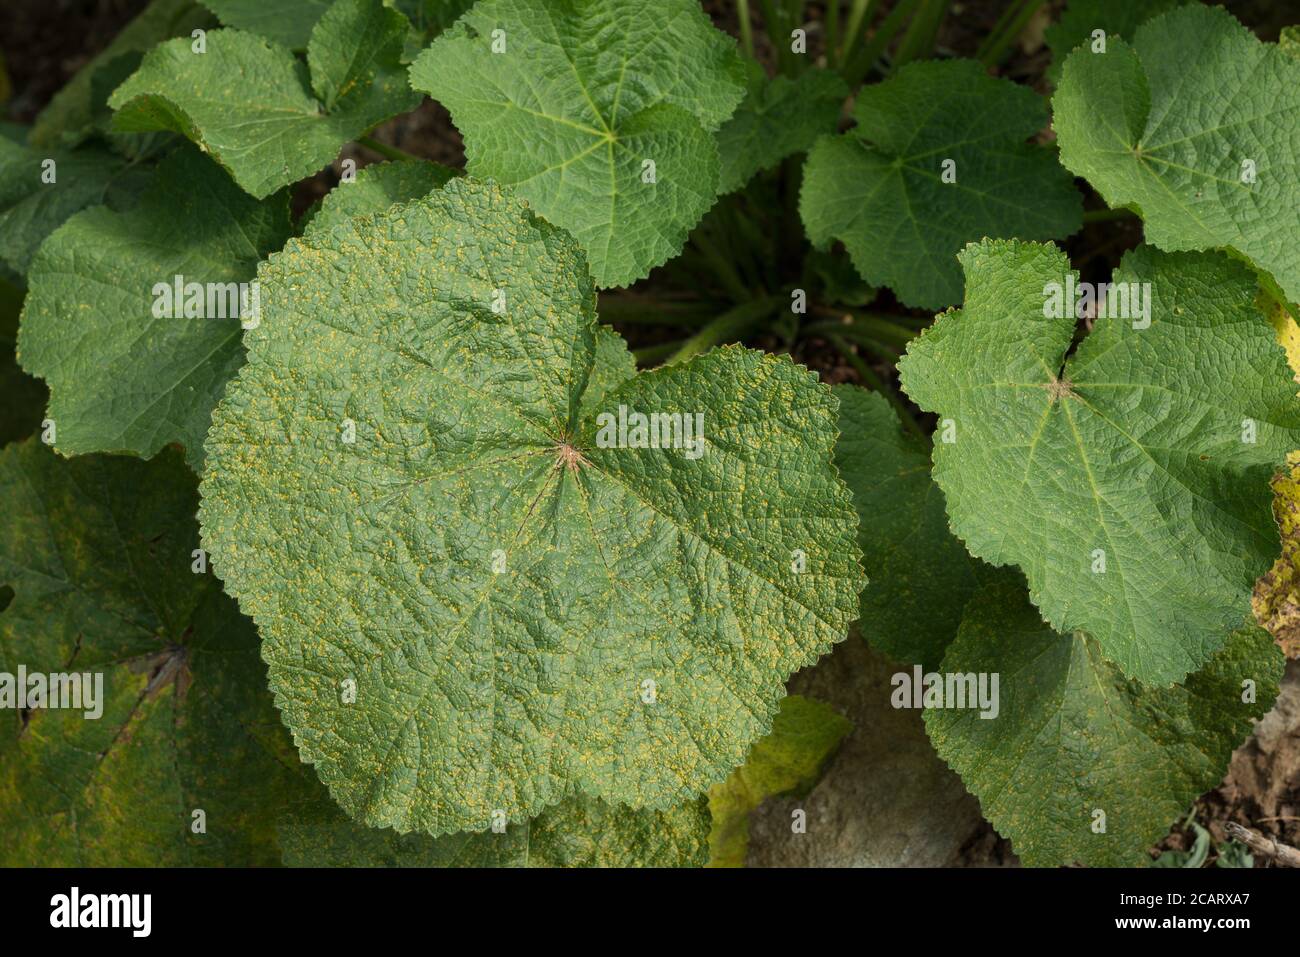 Hollyhock rust caused by fungus Puccinia heterospora or P.malvacearum  lower leaves of broad leafed plant covered in disease rife hot humid conditions Stock Photo